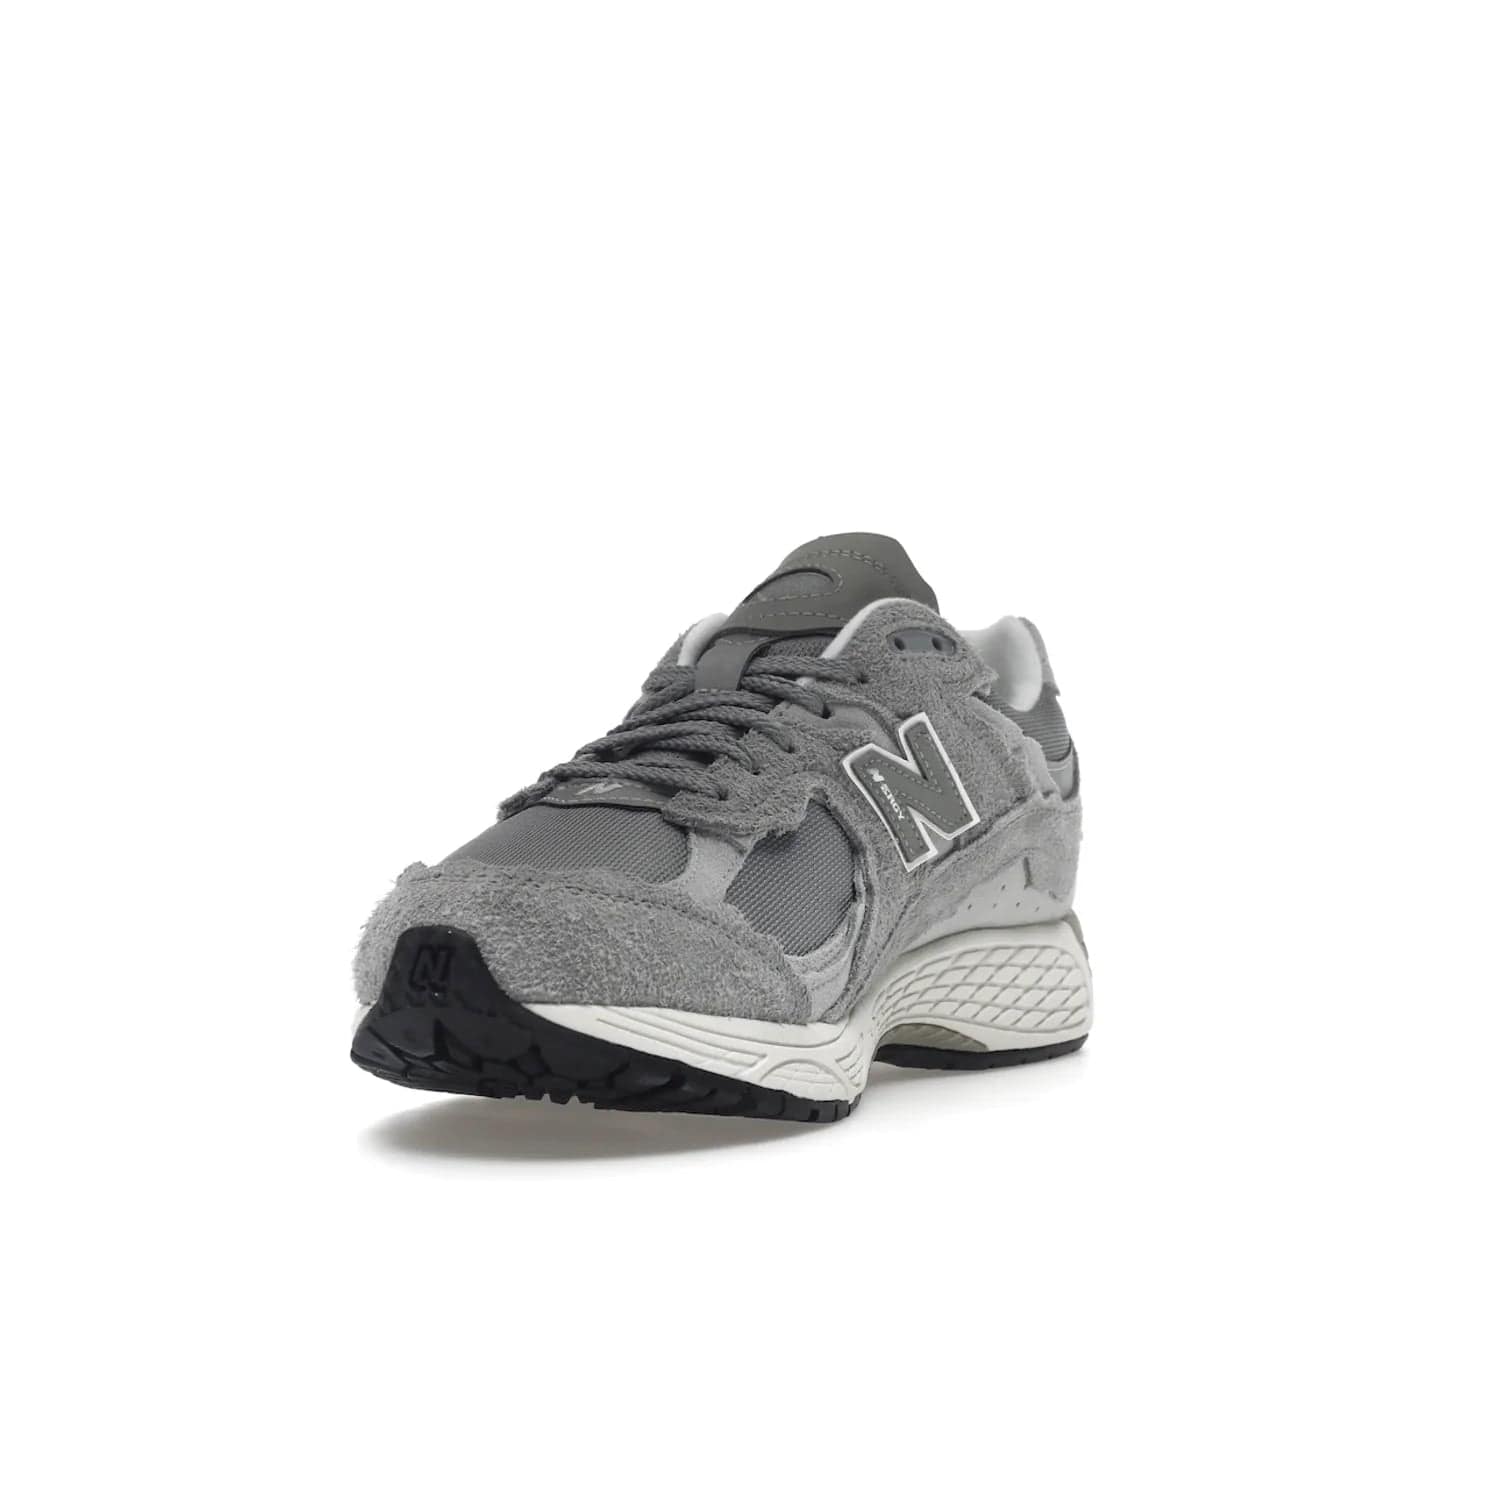 New Balance 2002R Protection Pack Grey - Image 13 - Only at www.BallersClubKickz.com - The New Balance 2002R Protection Pack Grey provides superior protection and all-day comfort. It features a blend of synthetic and mesh materials, foam midsole, rubber outsole, and a toe cap and heel counter. Show off the classic "N" logo and "2002R" lettering. Get a pair on February 14, 2023 for protection and style.